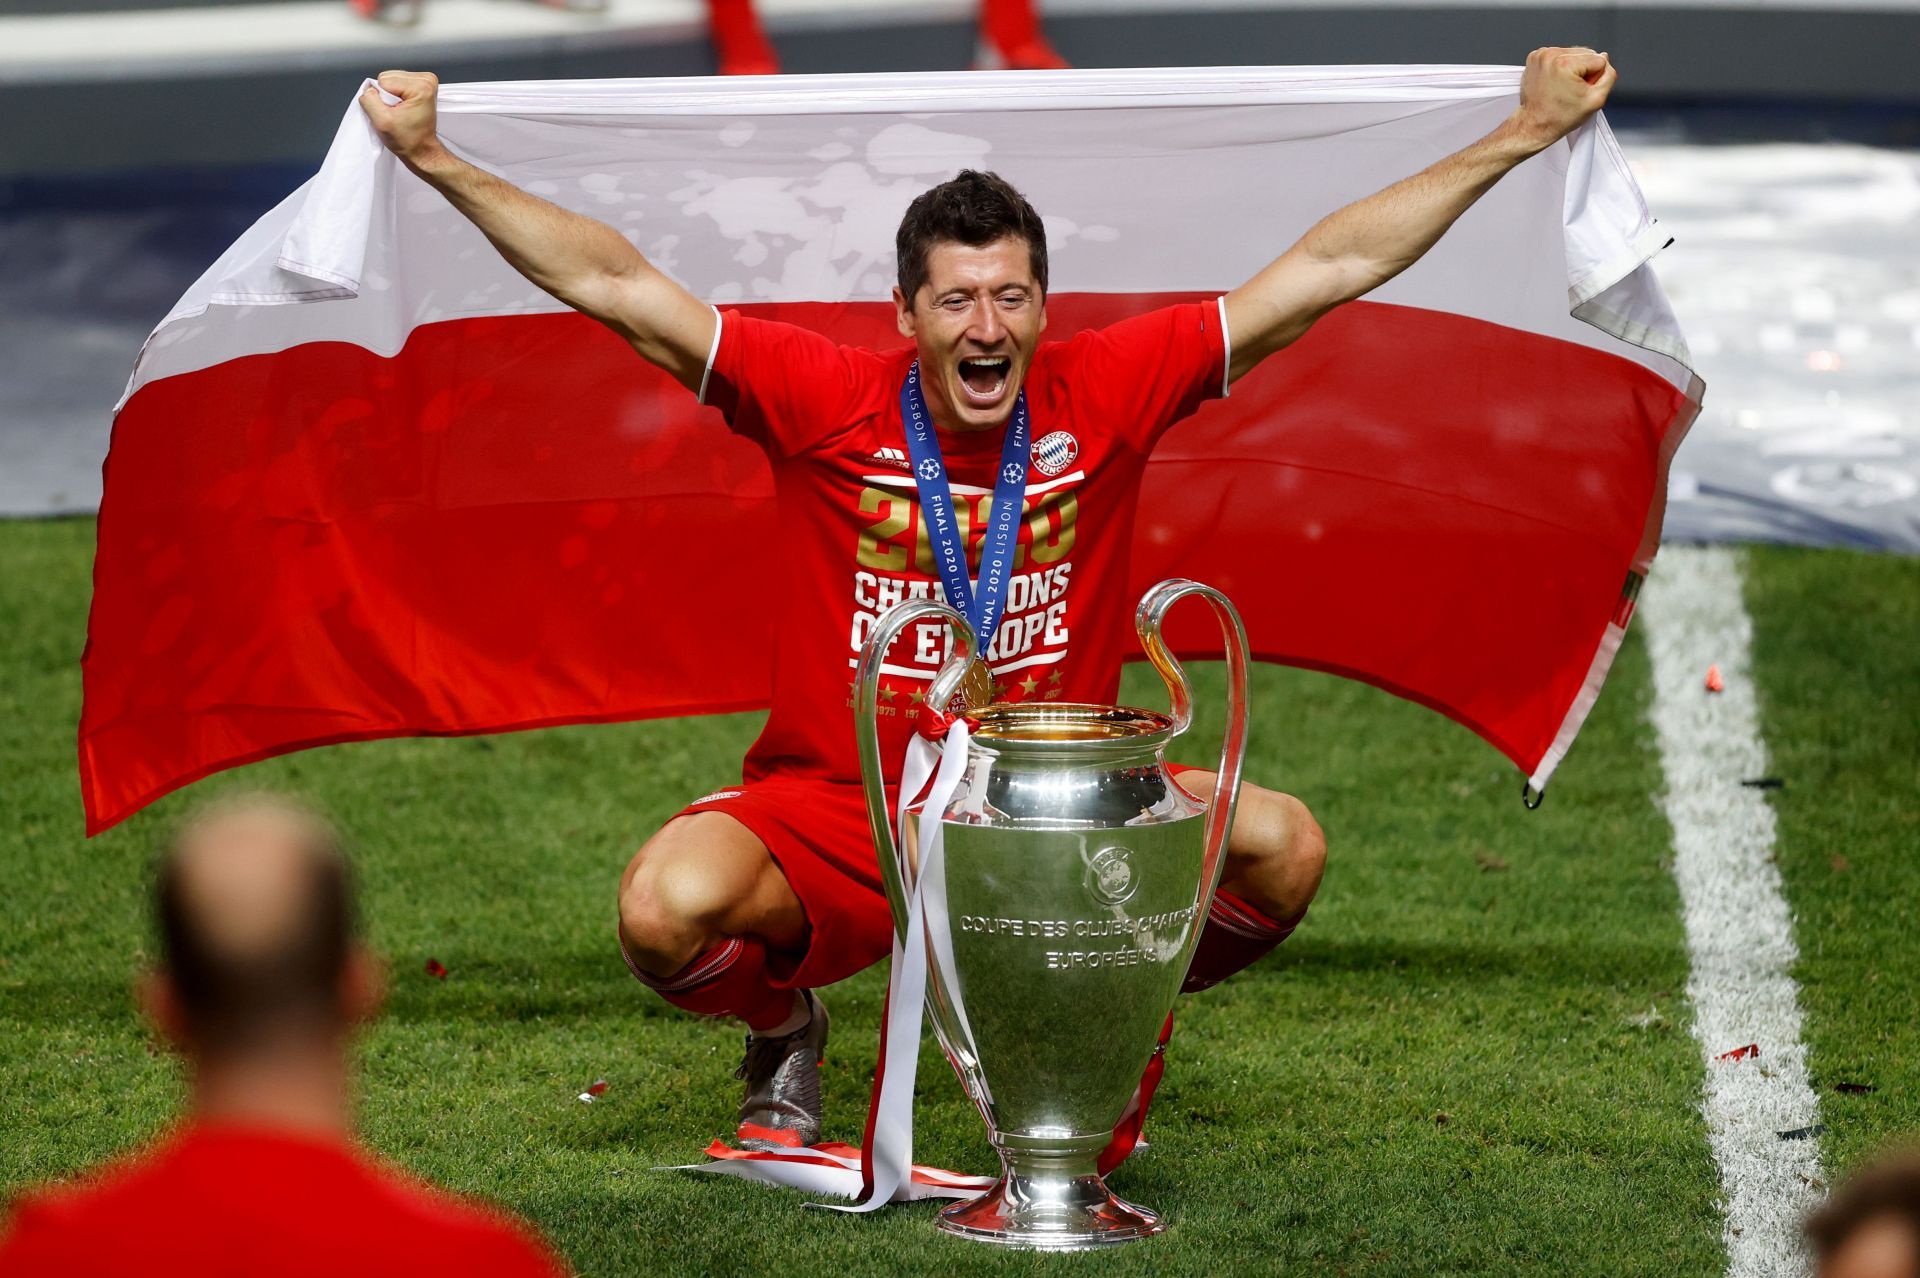 Robert Lewandowski would have won a lot of accolades if not for Cristiano Ronaldo and Lionel Messi